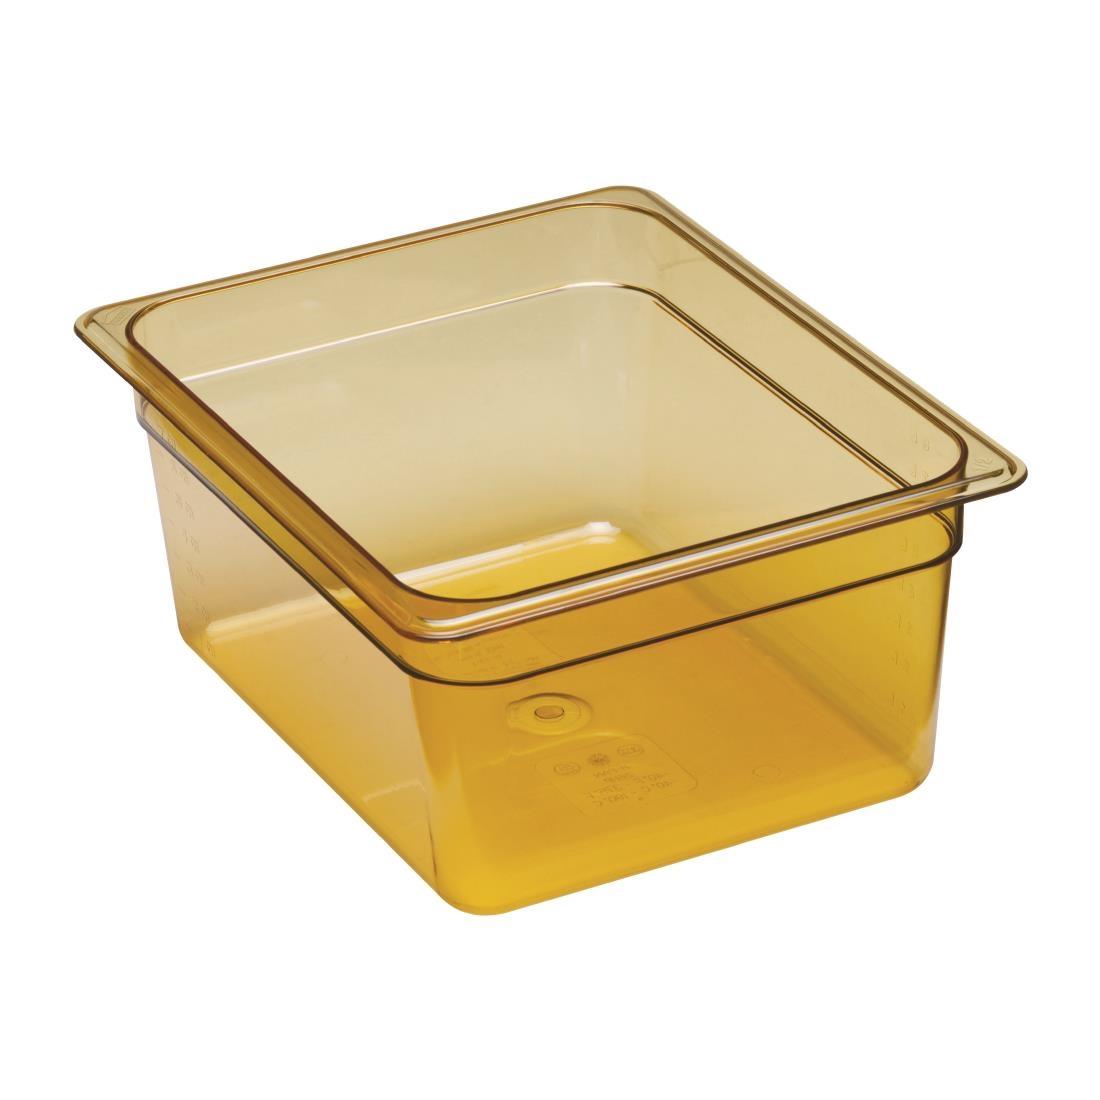 Cambro High Heat 1/2 Gastronorm Food Pan 150mm - DW483  - 1